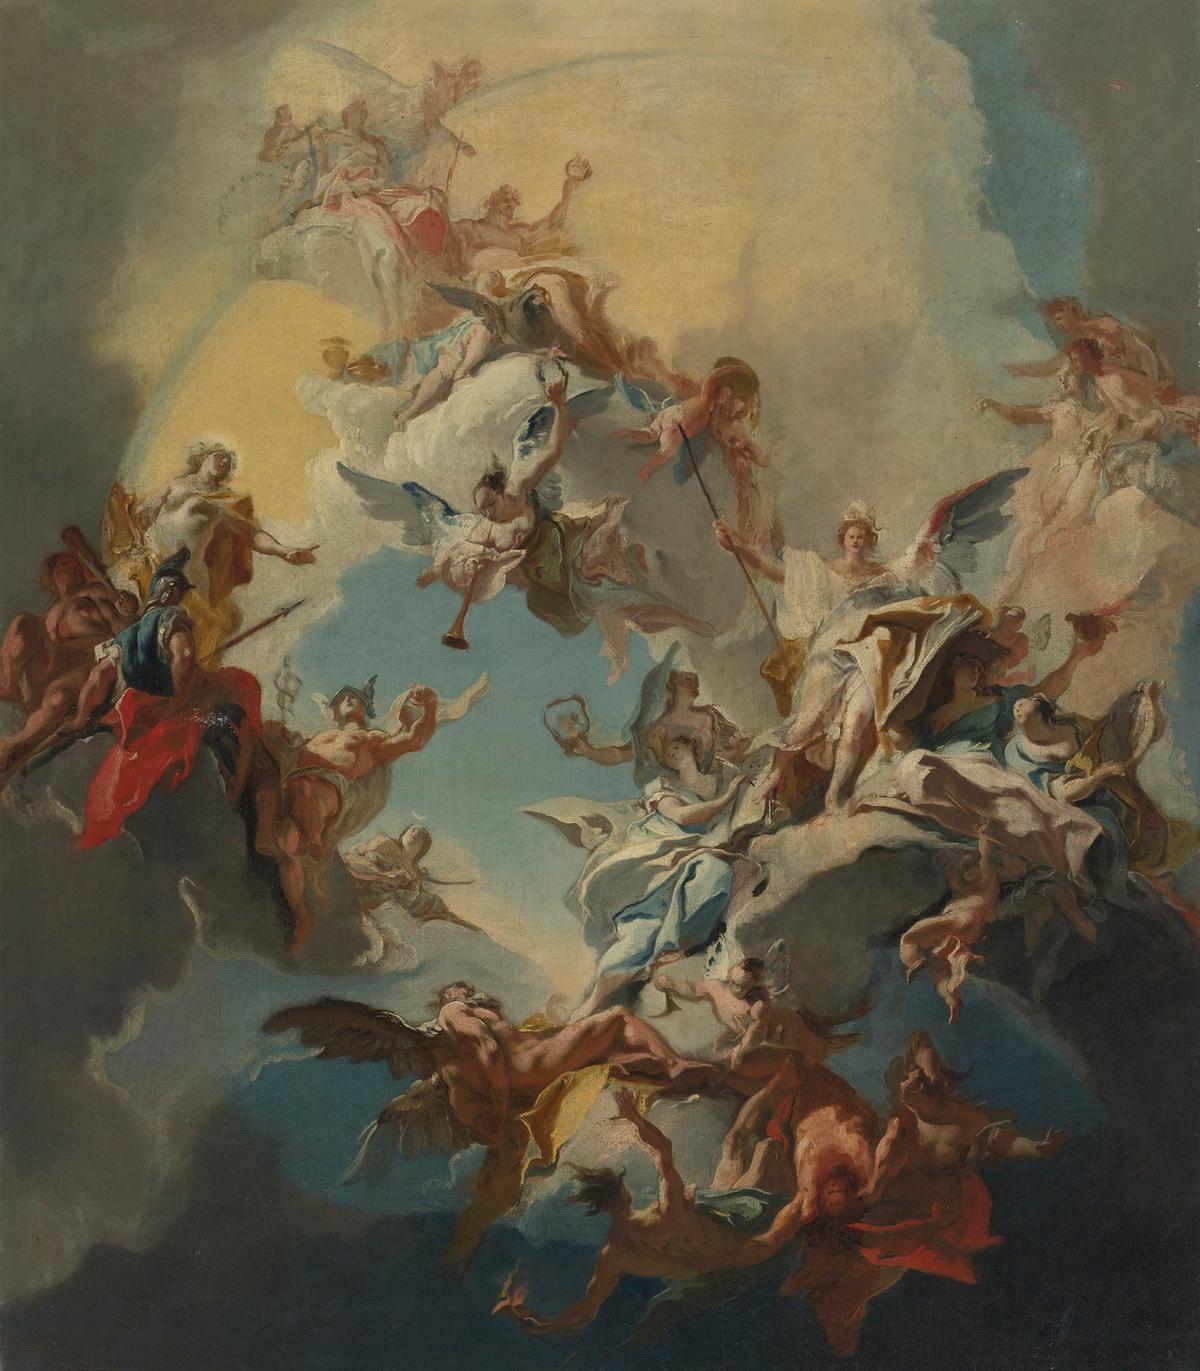 The gospel of reason began replacing all organized religions during the Enlightenment period. Reason, the figure who is centrally located and holding a spear, is surrounded by Wisdom (holding a mirror), Advice (holding a book), and Knowledge (holding a torch). "The Triumph of Reason," 18th century, by Carlo Innocenzo Carlone. Oil on canvas. (Public Domain)